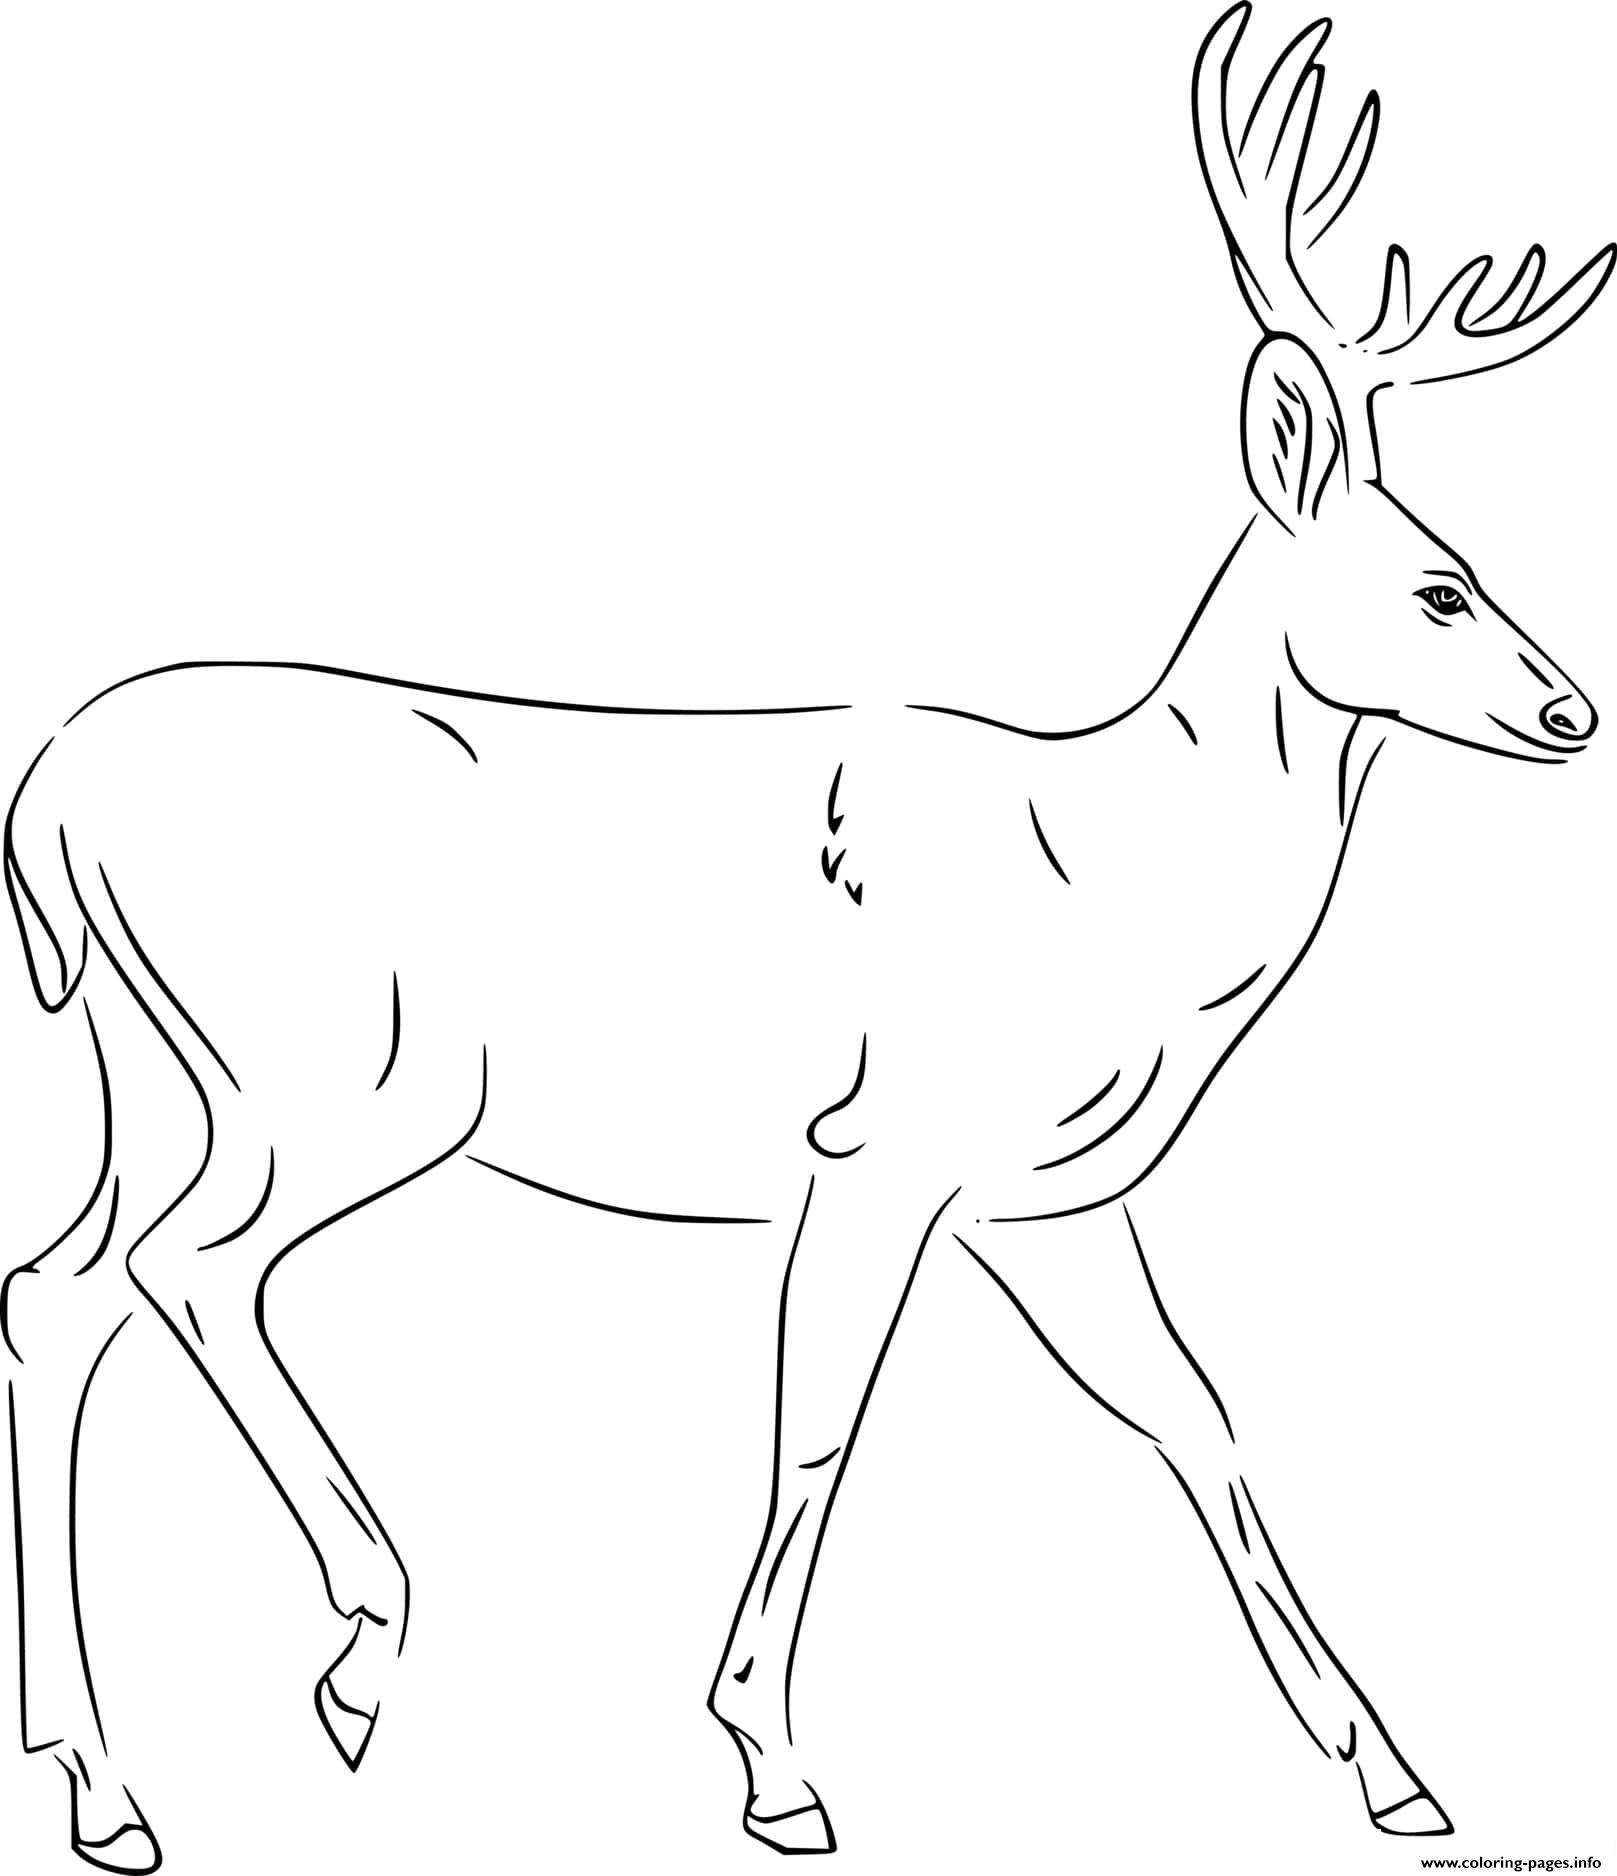 Coloring Pages Of Realistic Deer - Printable Realistic Animals Coloring